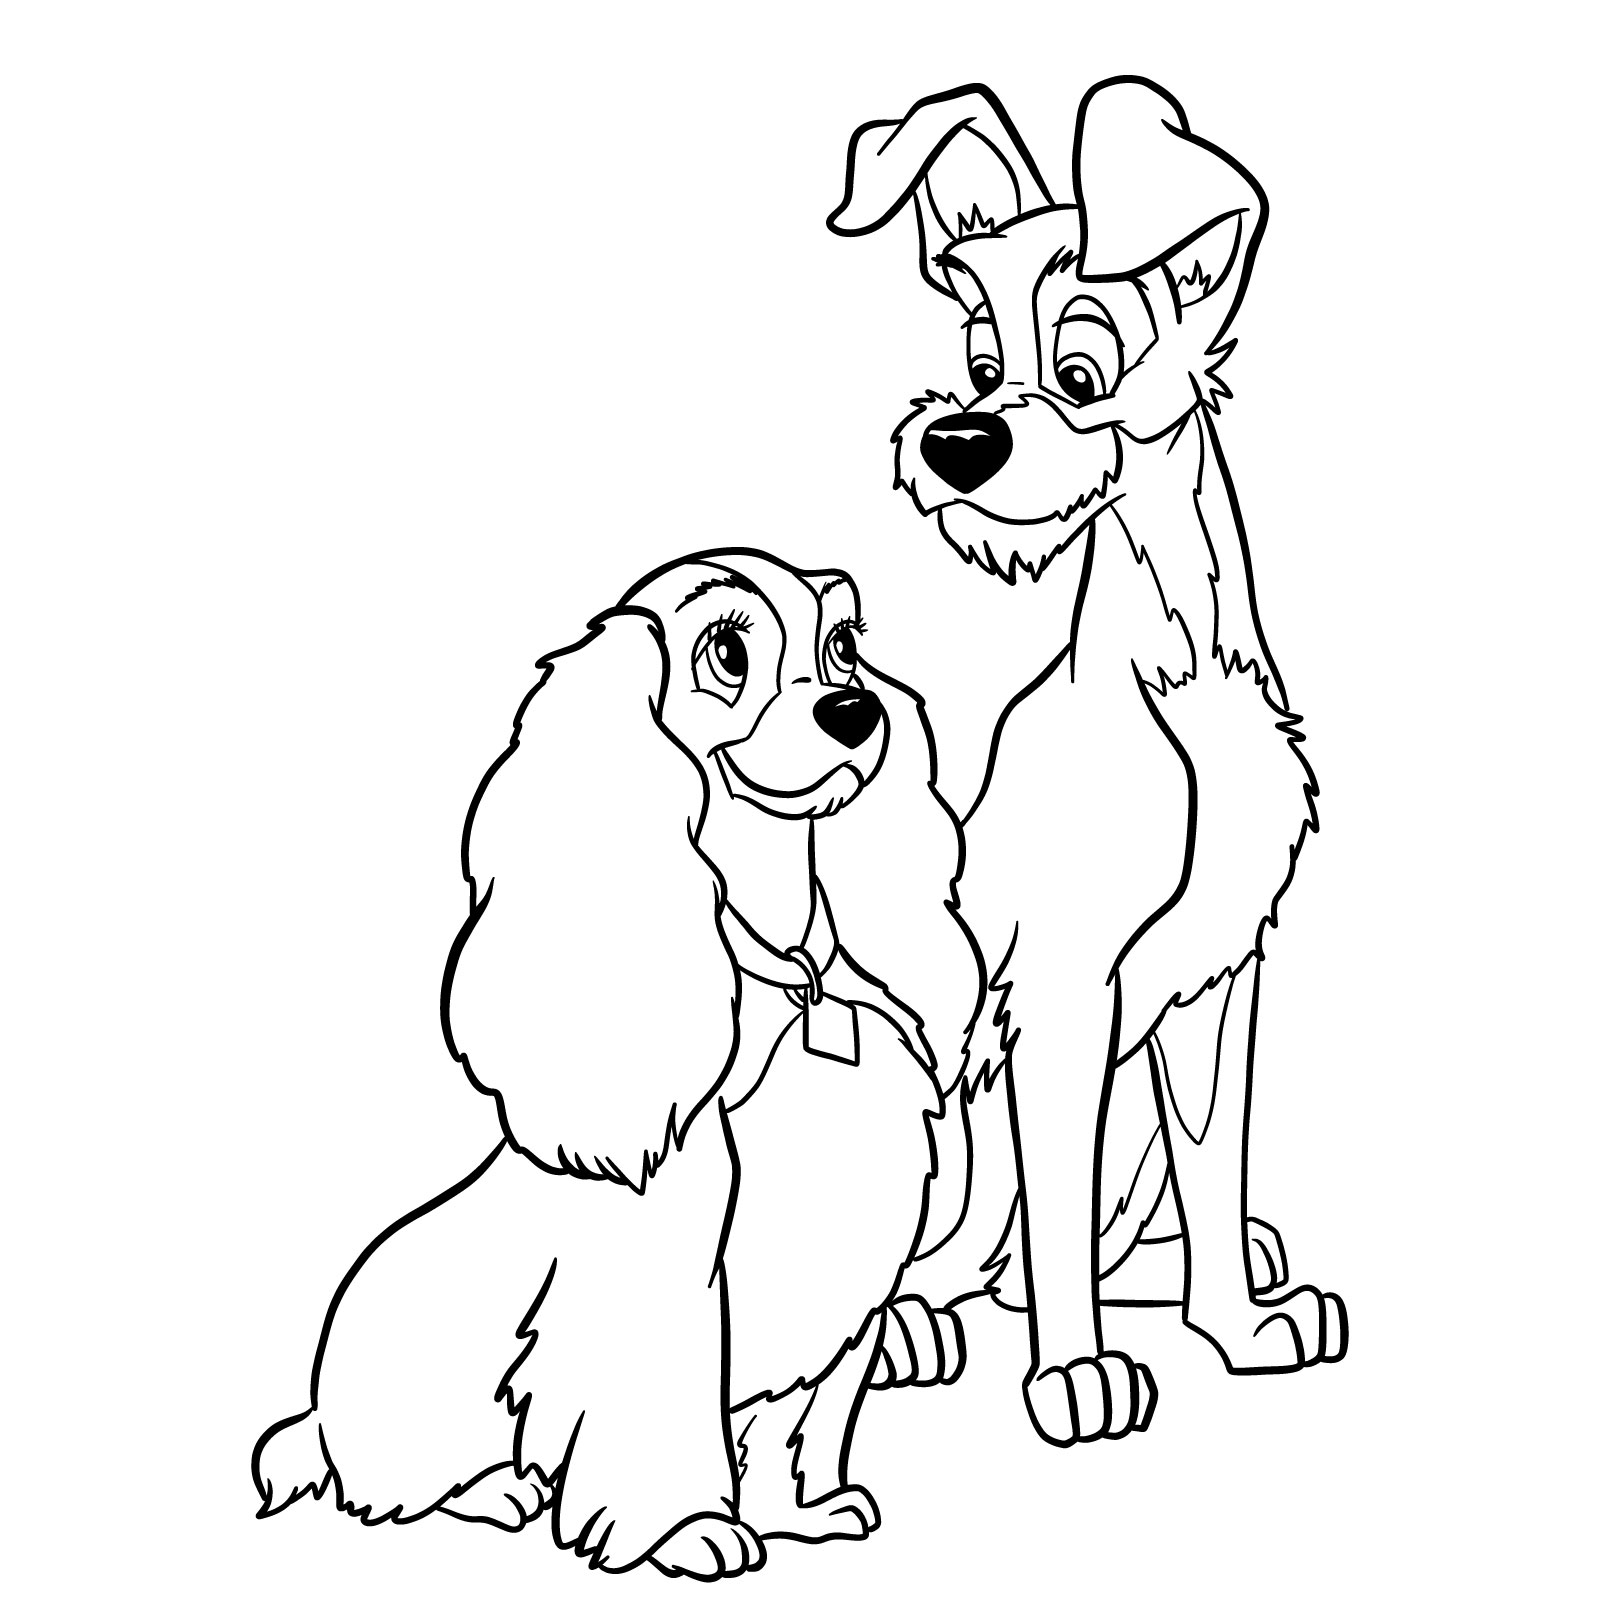 How to draw Lady and Tramp together - coloring